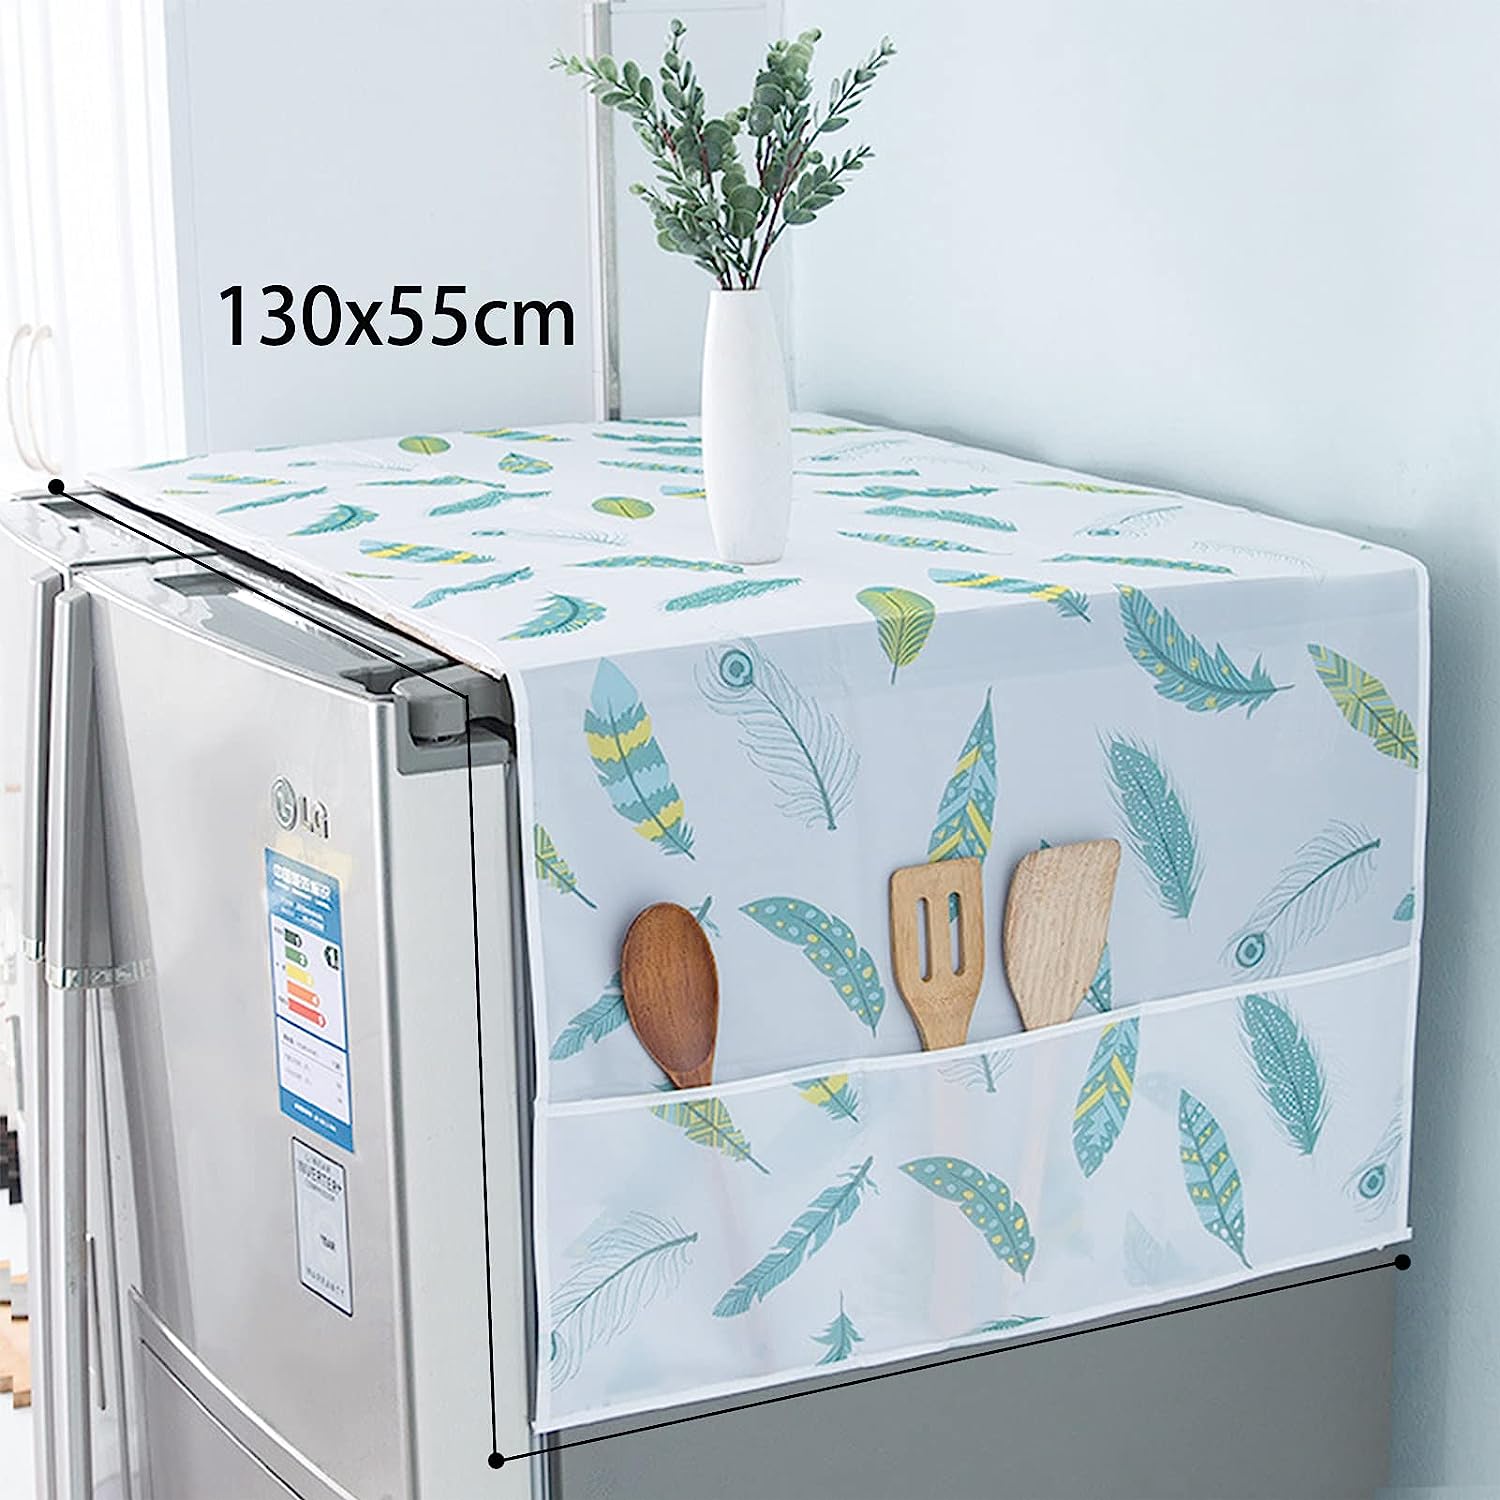 Refrigerator Dust-Proof Cover - Home Essentials Store Retail